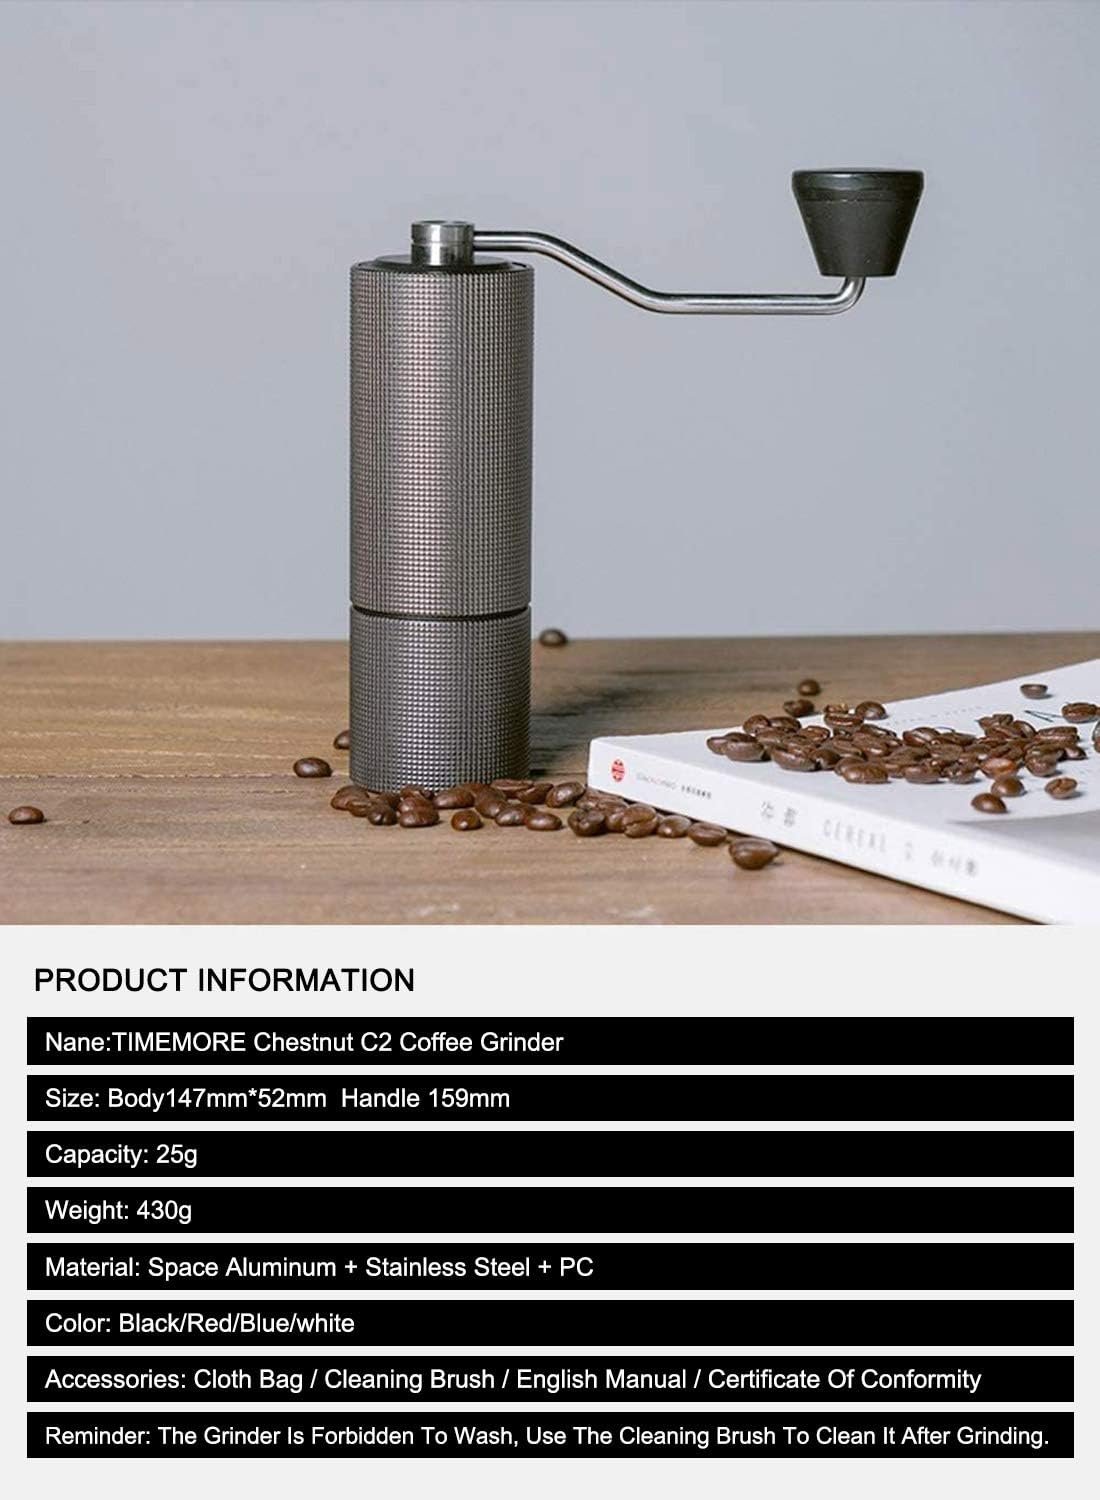 3 C2 Manual Coffee Grinder by TIMEMORE with Stainless Steel Conical Burr